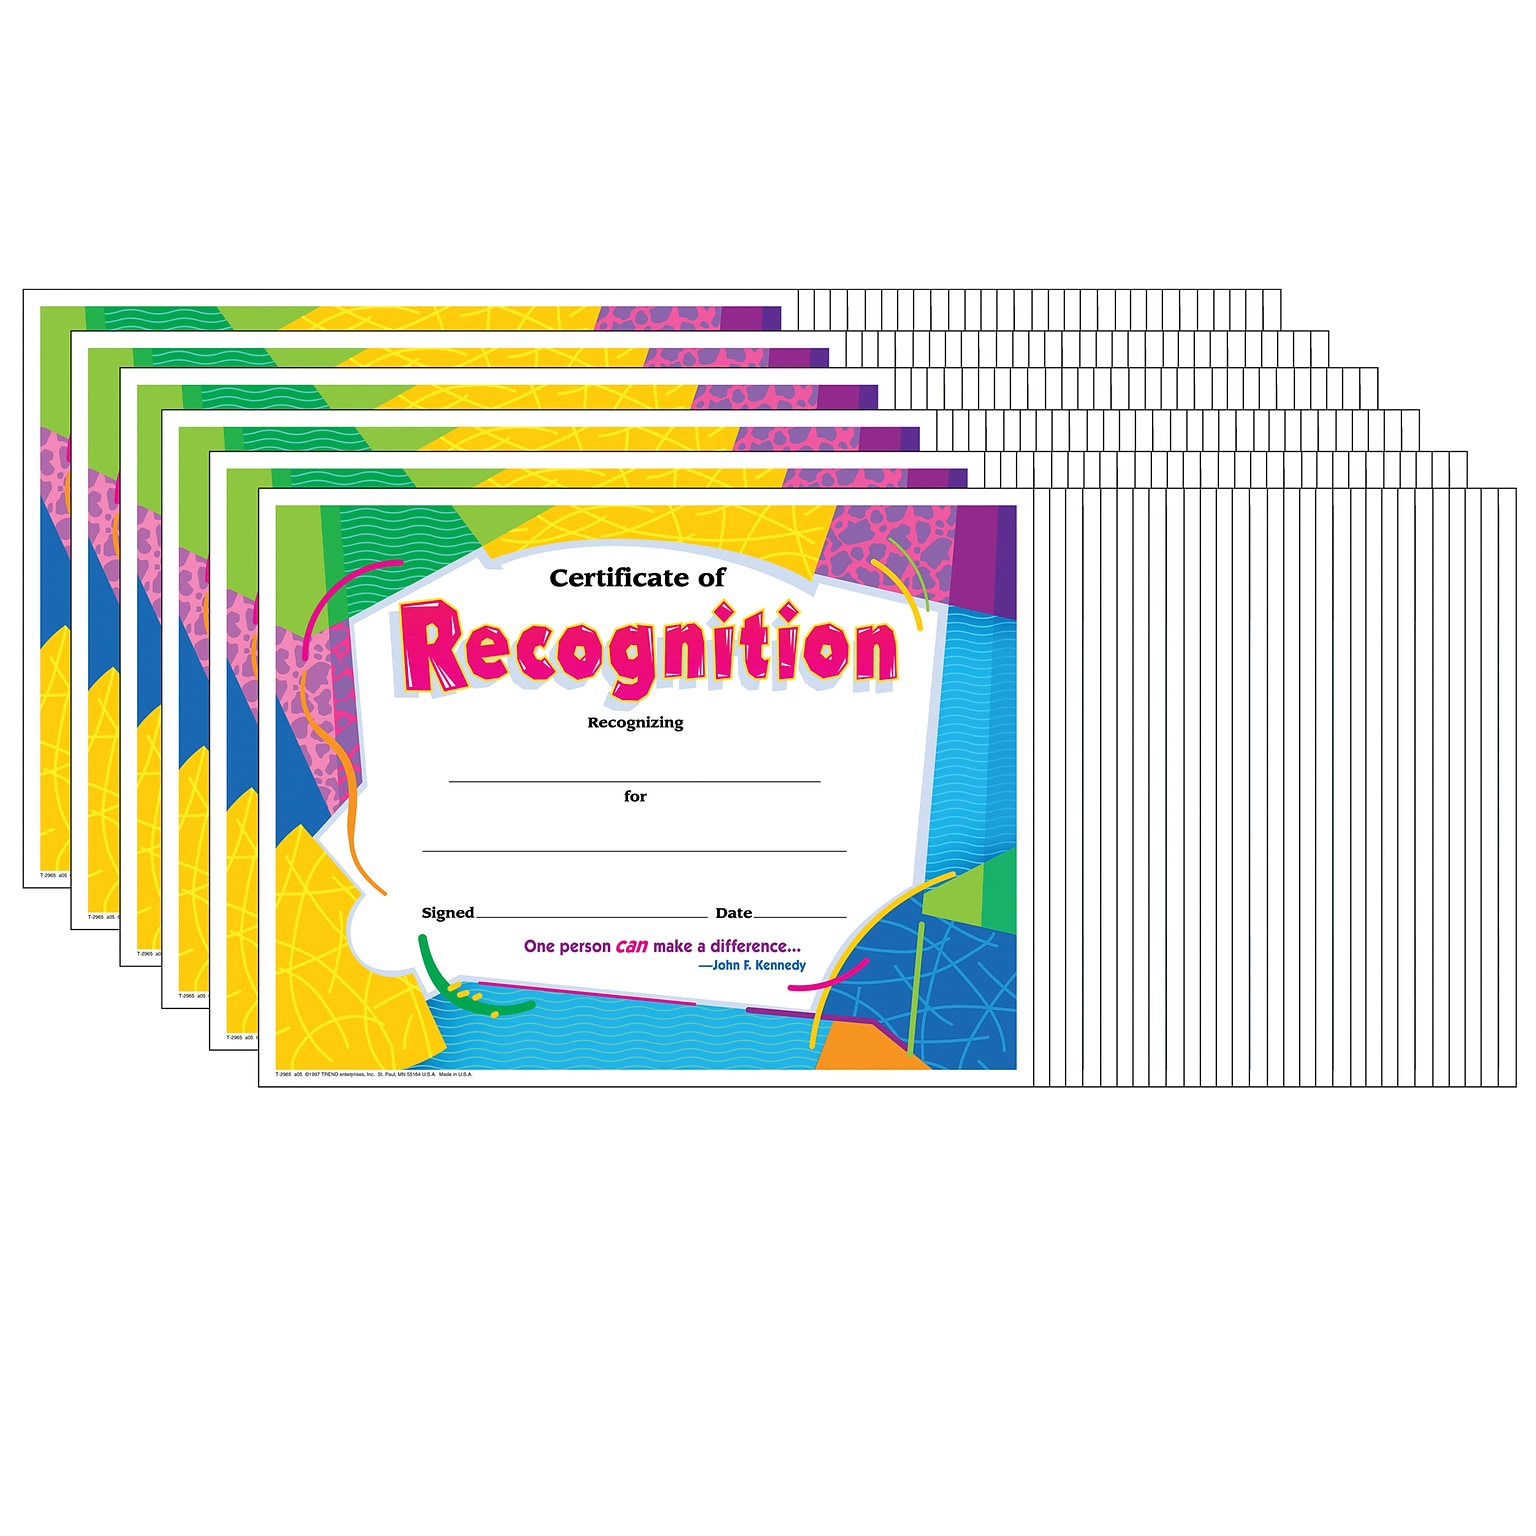 TREND Certificate of Recognition Colorful Classics Certificates, 30 Per Pack, 6 Packs (T-2965-6)